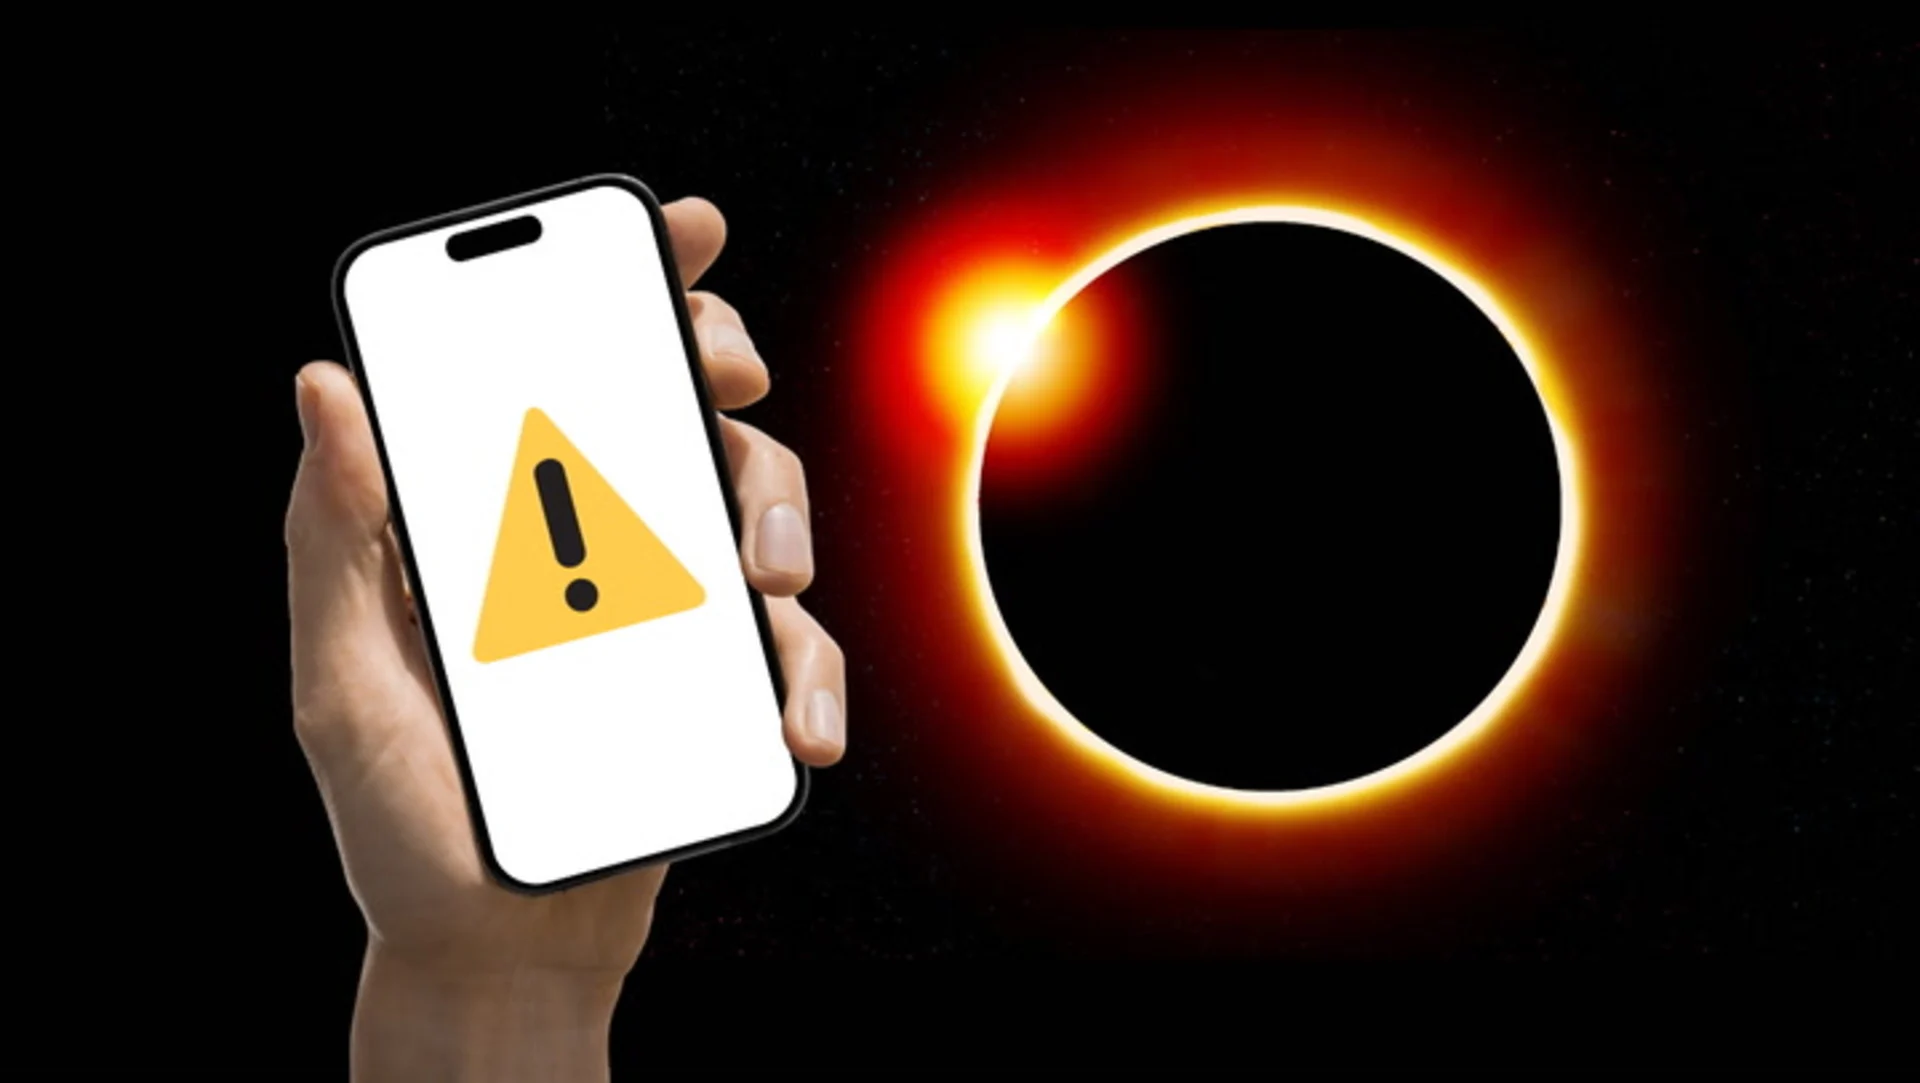 Will massive crowds disrupt cell service, emergency alerts during the eclipse?